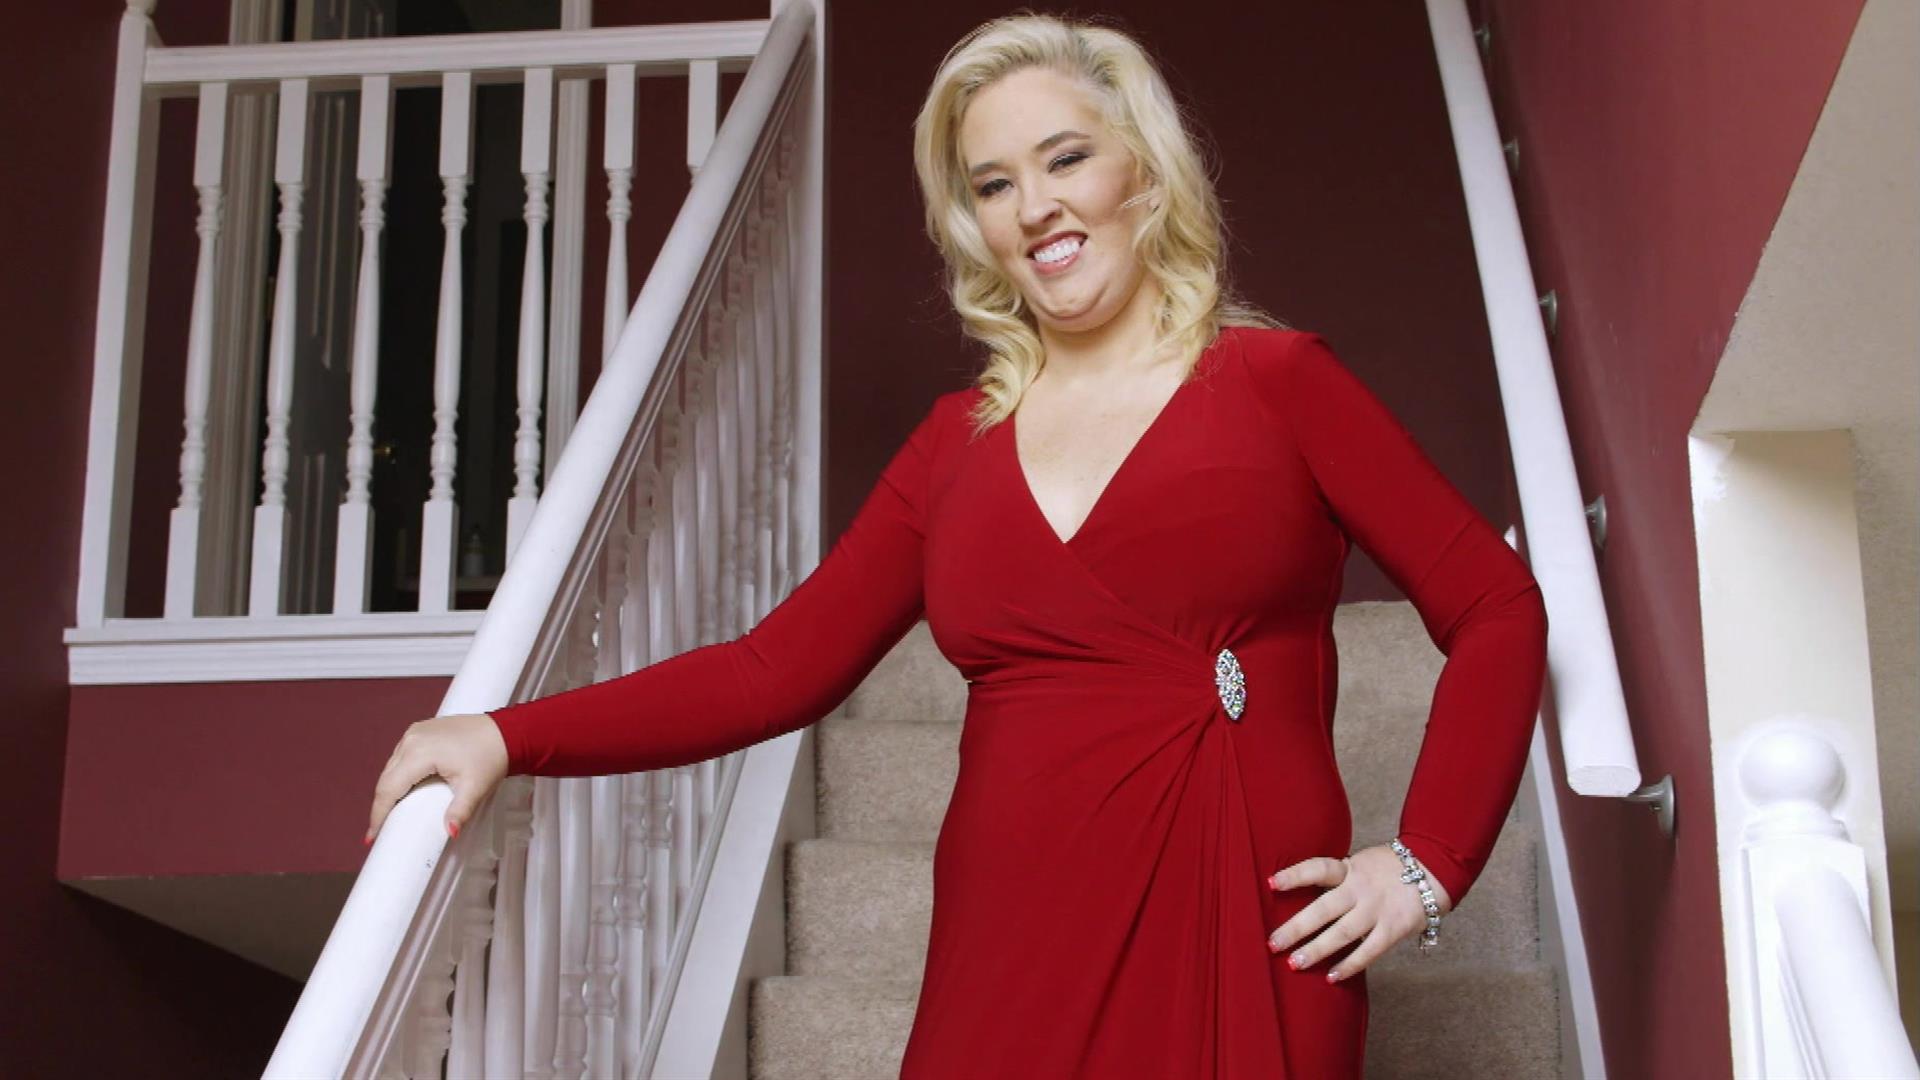 Mama June Season 2 Returns! Watch the First Look Now!